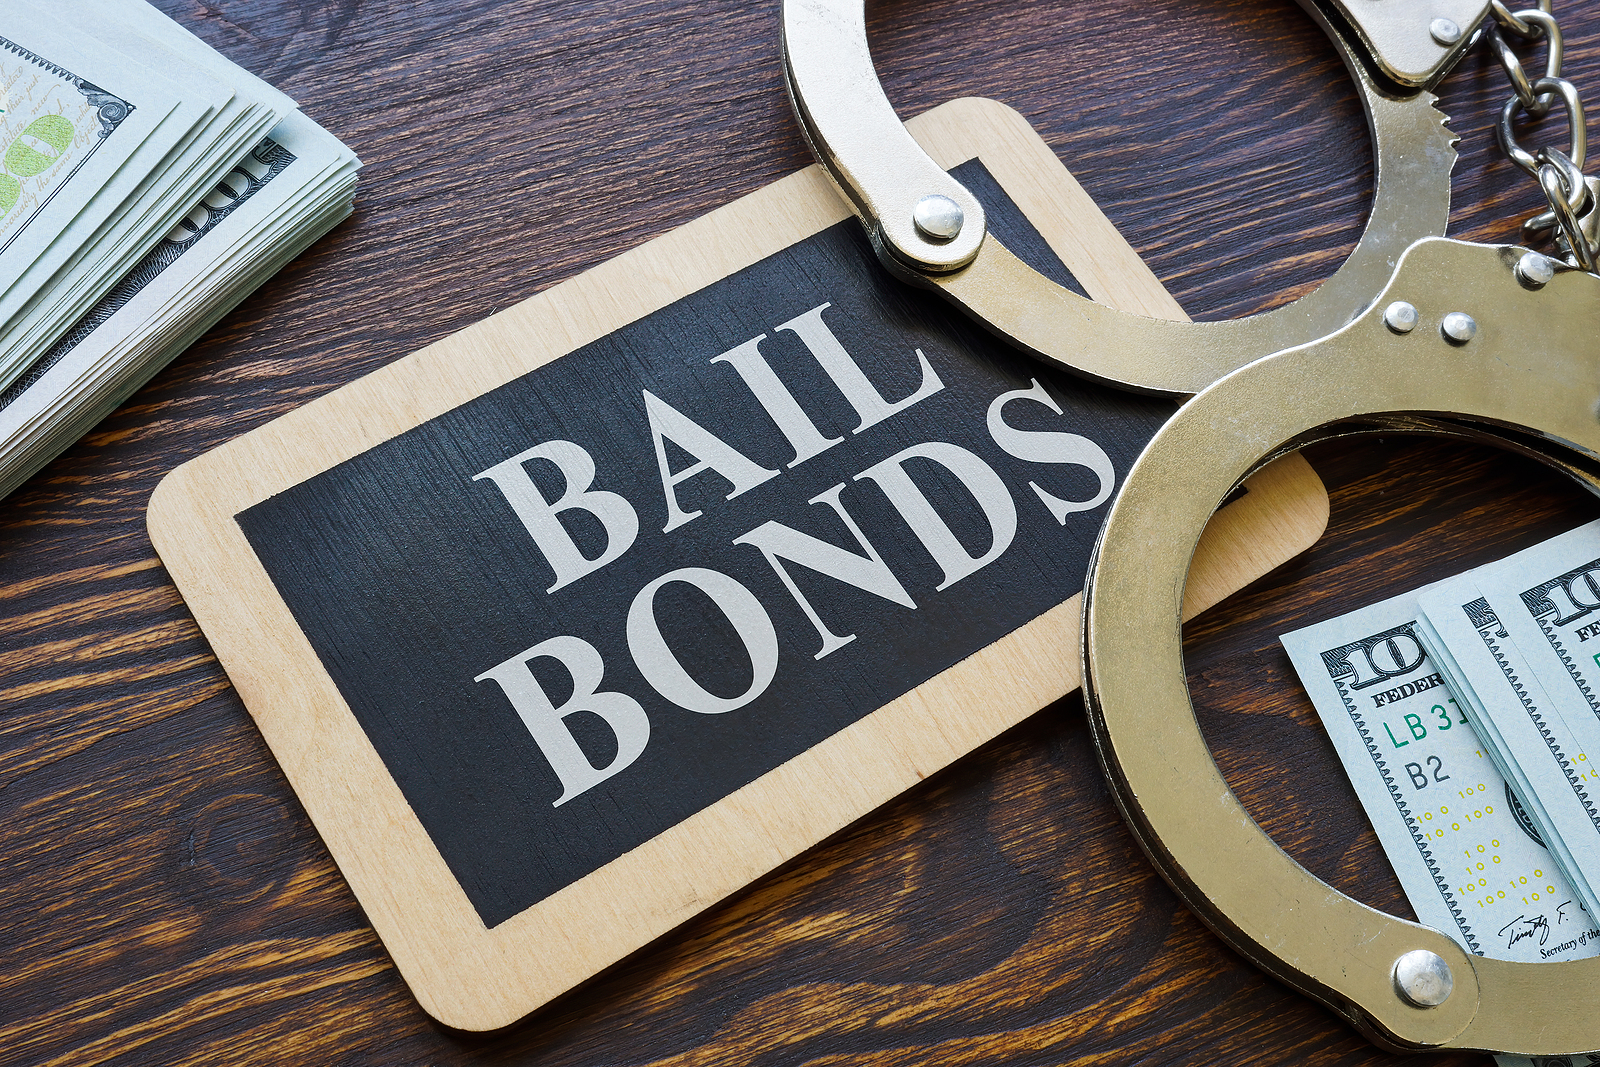 What Happens If a Defendant Gets Rearrested While on Bond